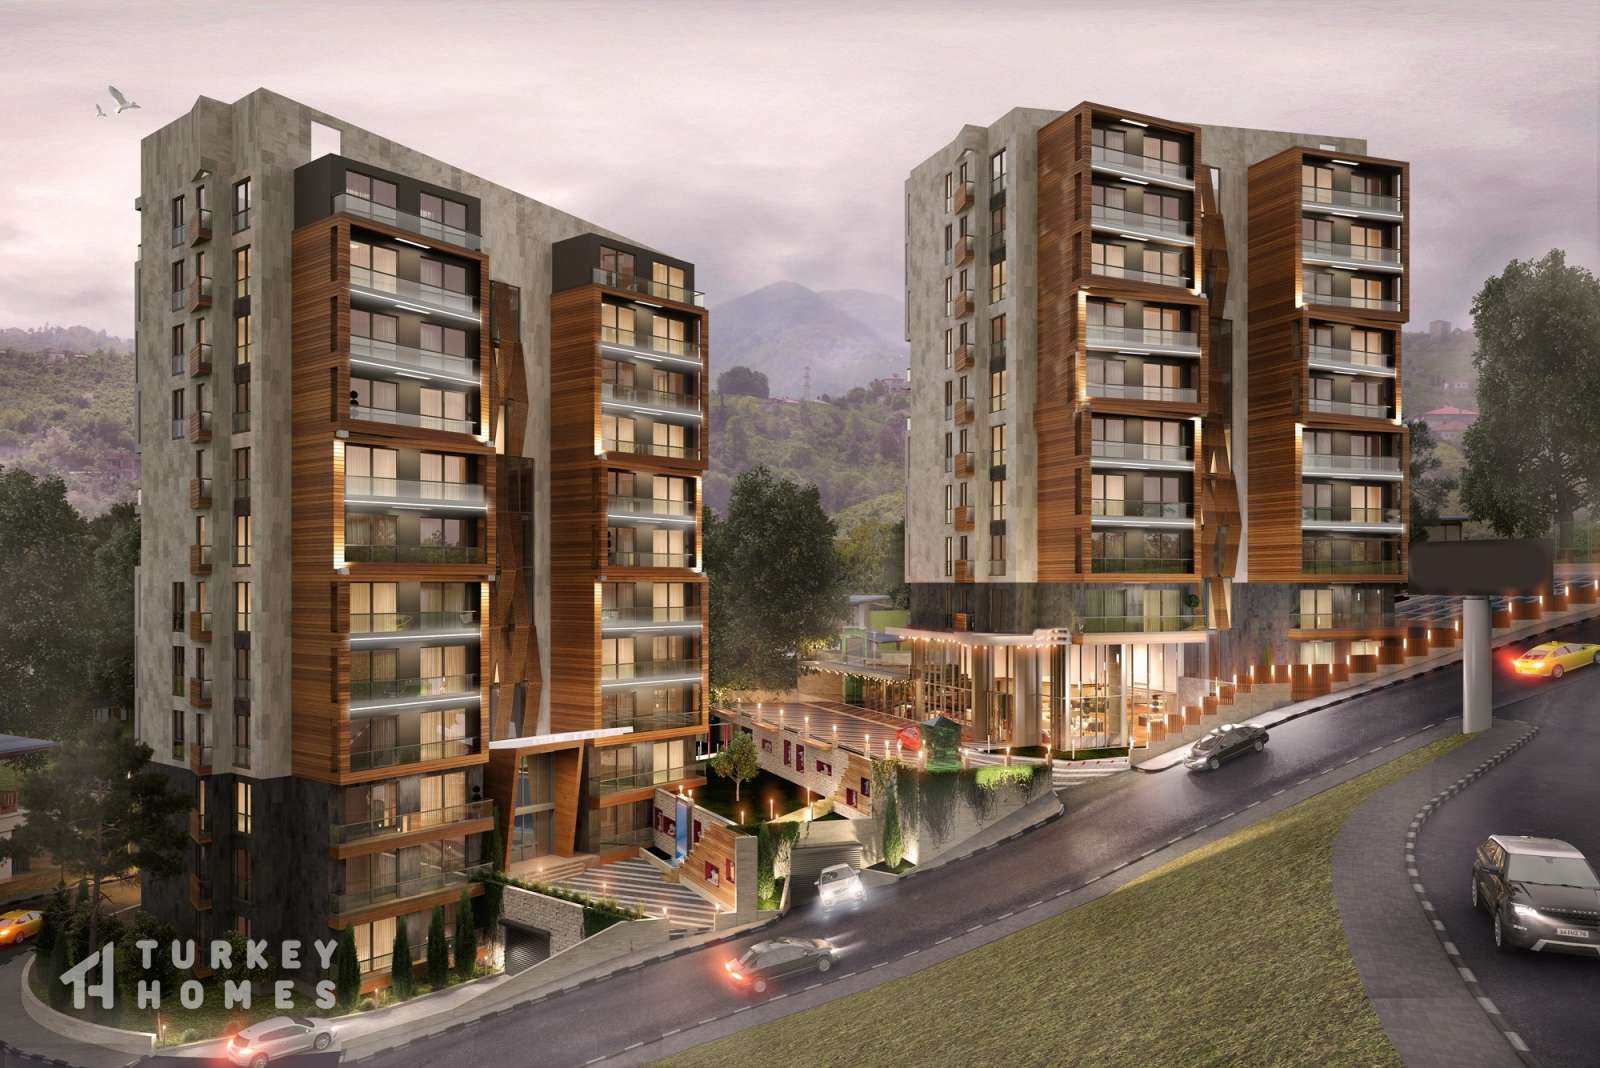 Hotel Concept Luxury Trabzon Apartments - Green backdrop